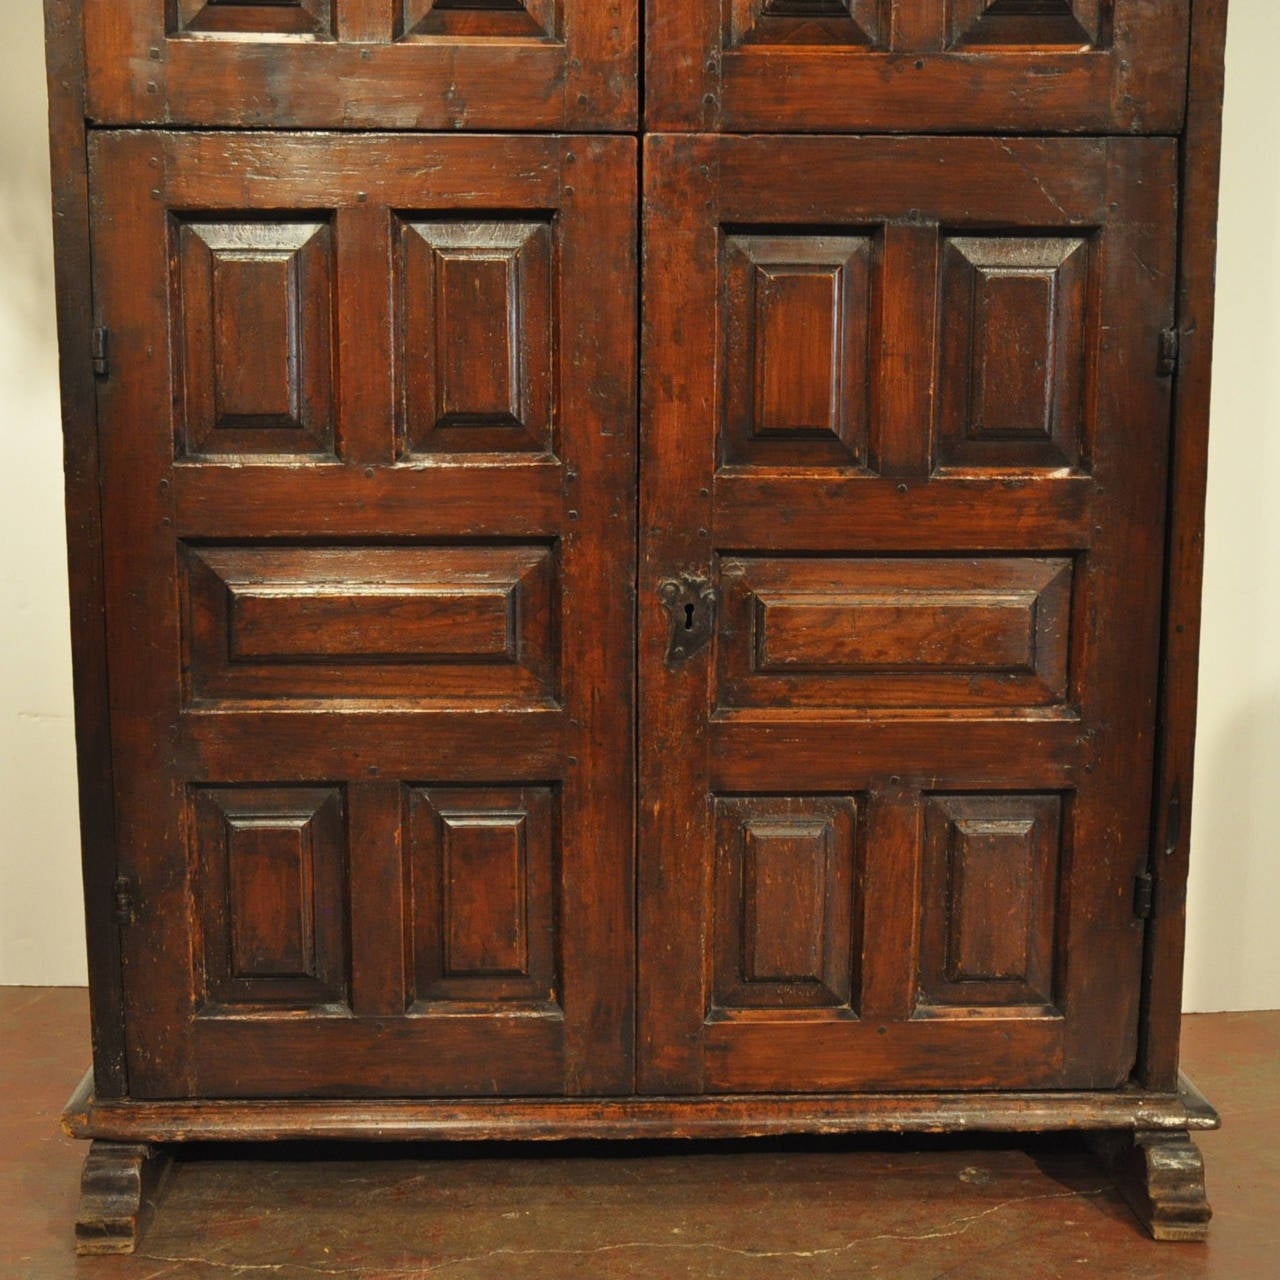 Hand-Carved 18th Century Spanish Four-Door Walnut Cabinet with Raised Panels